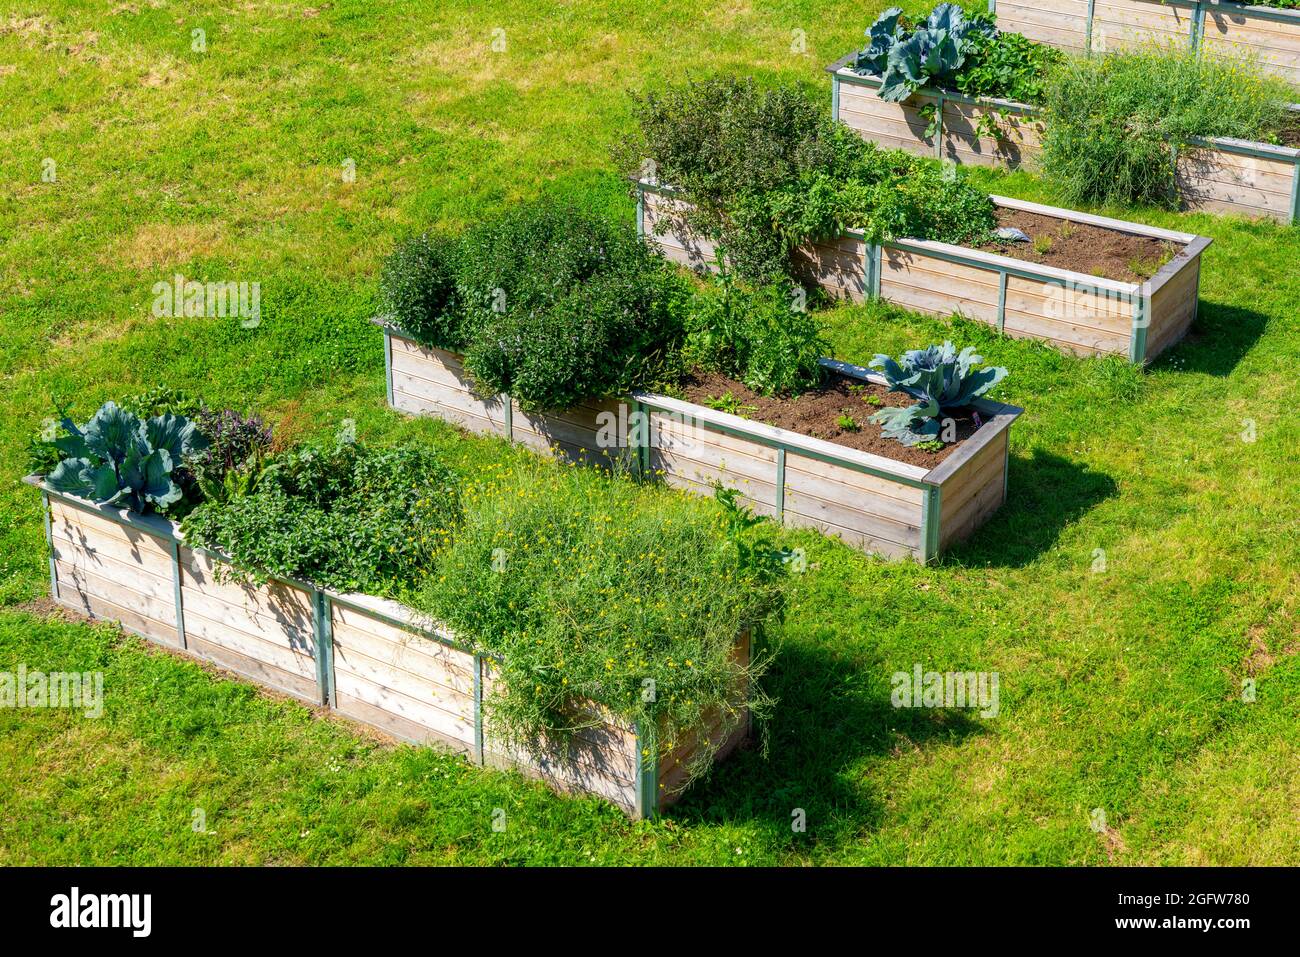 Raised beds, with different ornamental and useful plants, Stock Photo